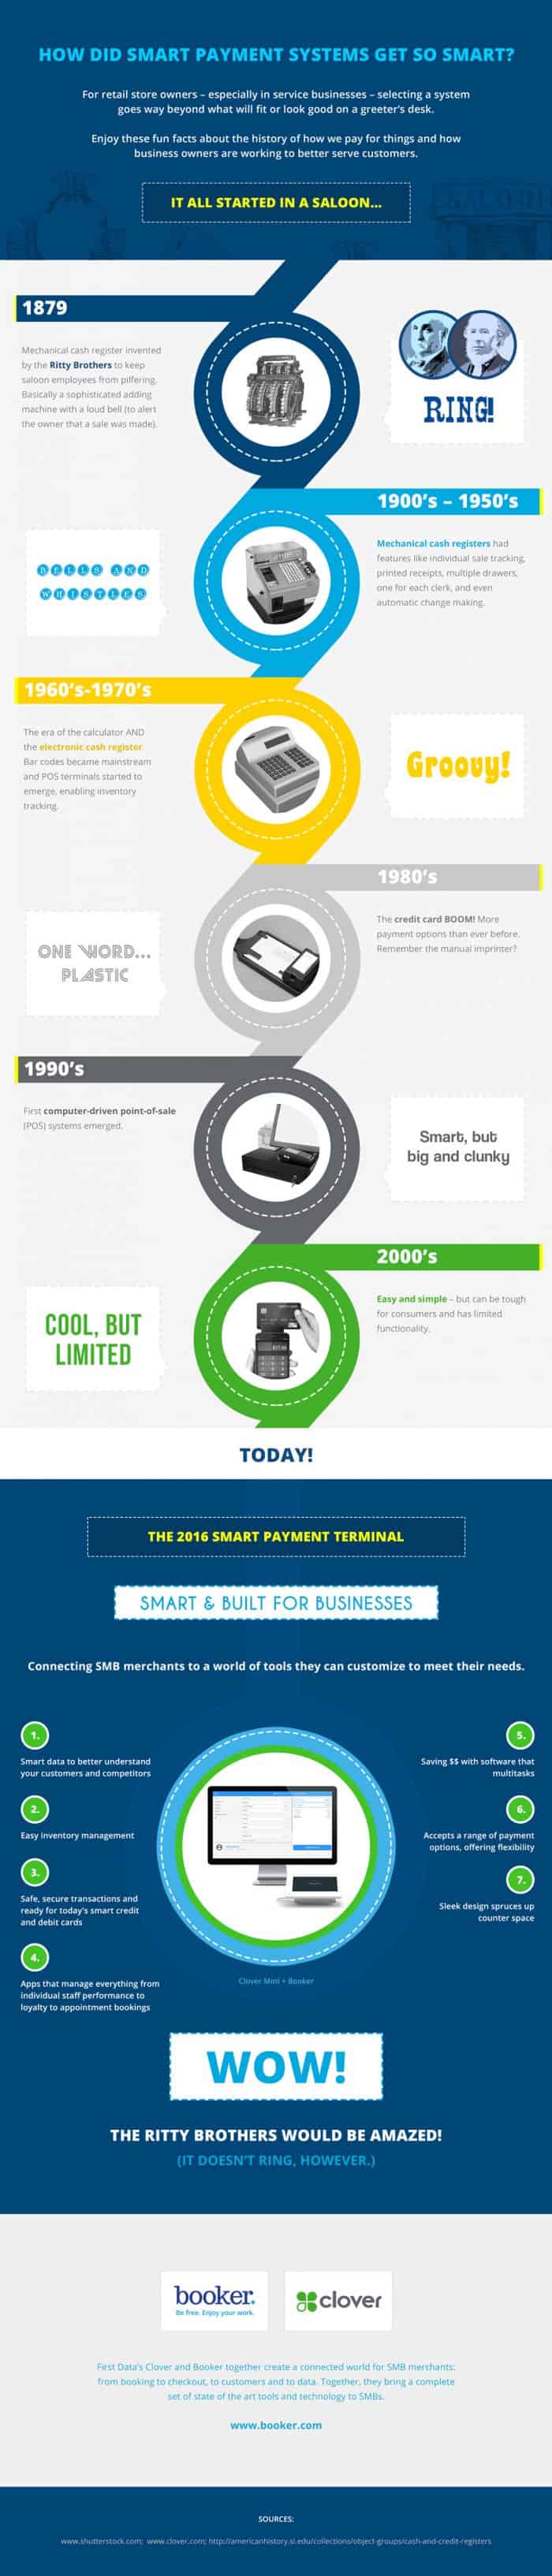 History of Point of Sales Systems Infographic